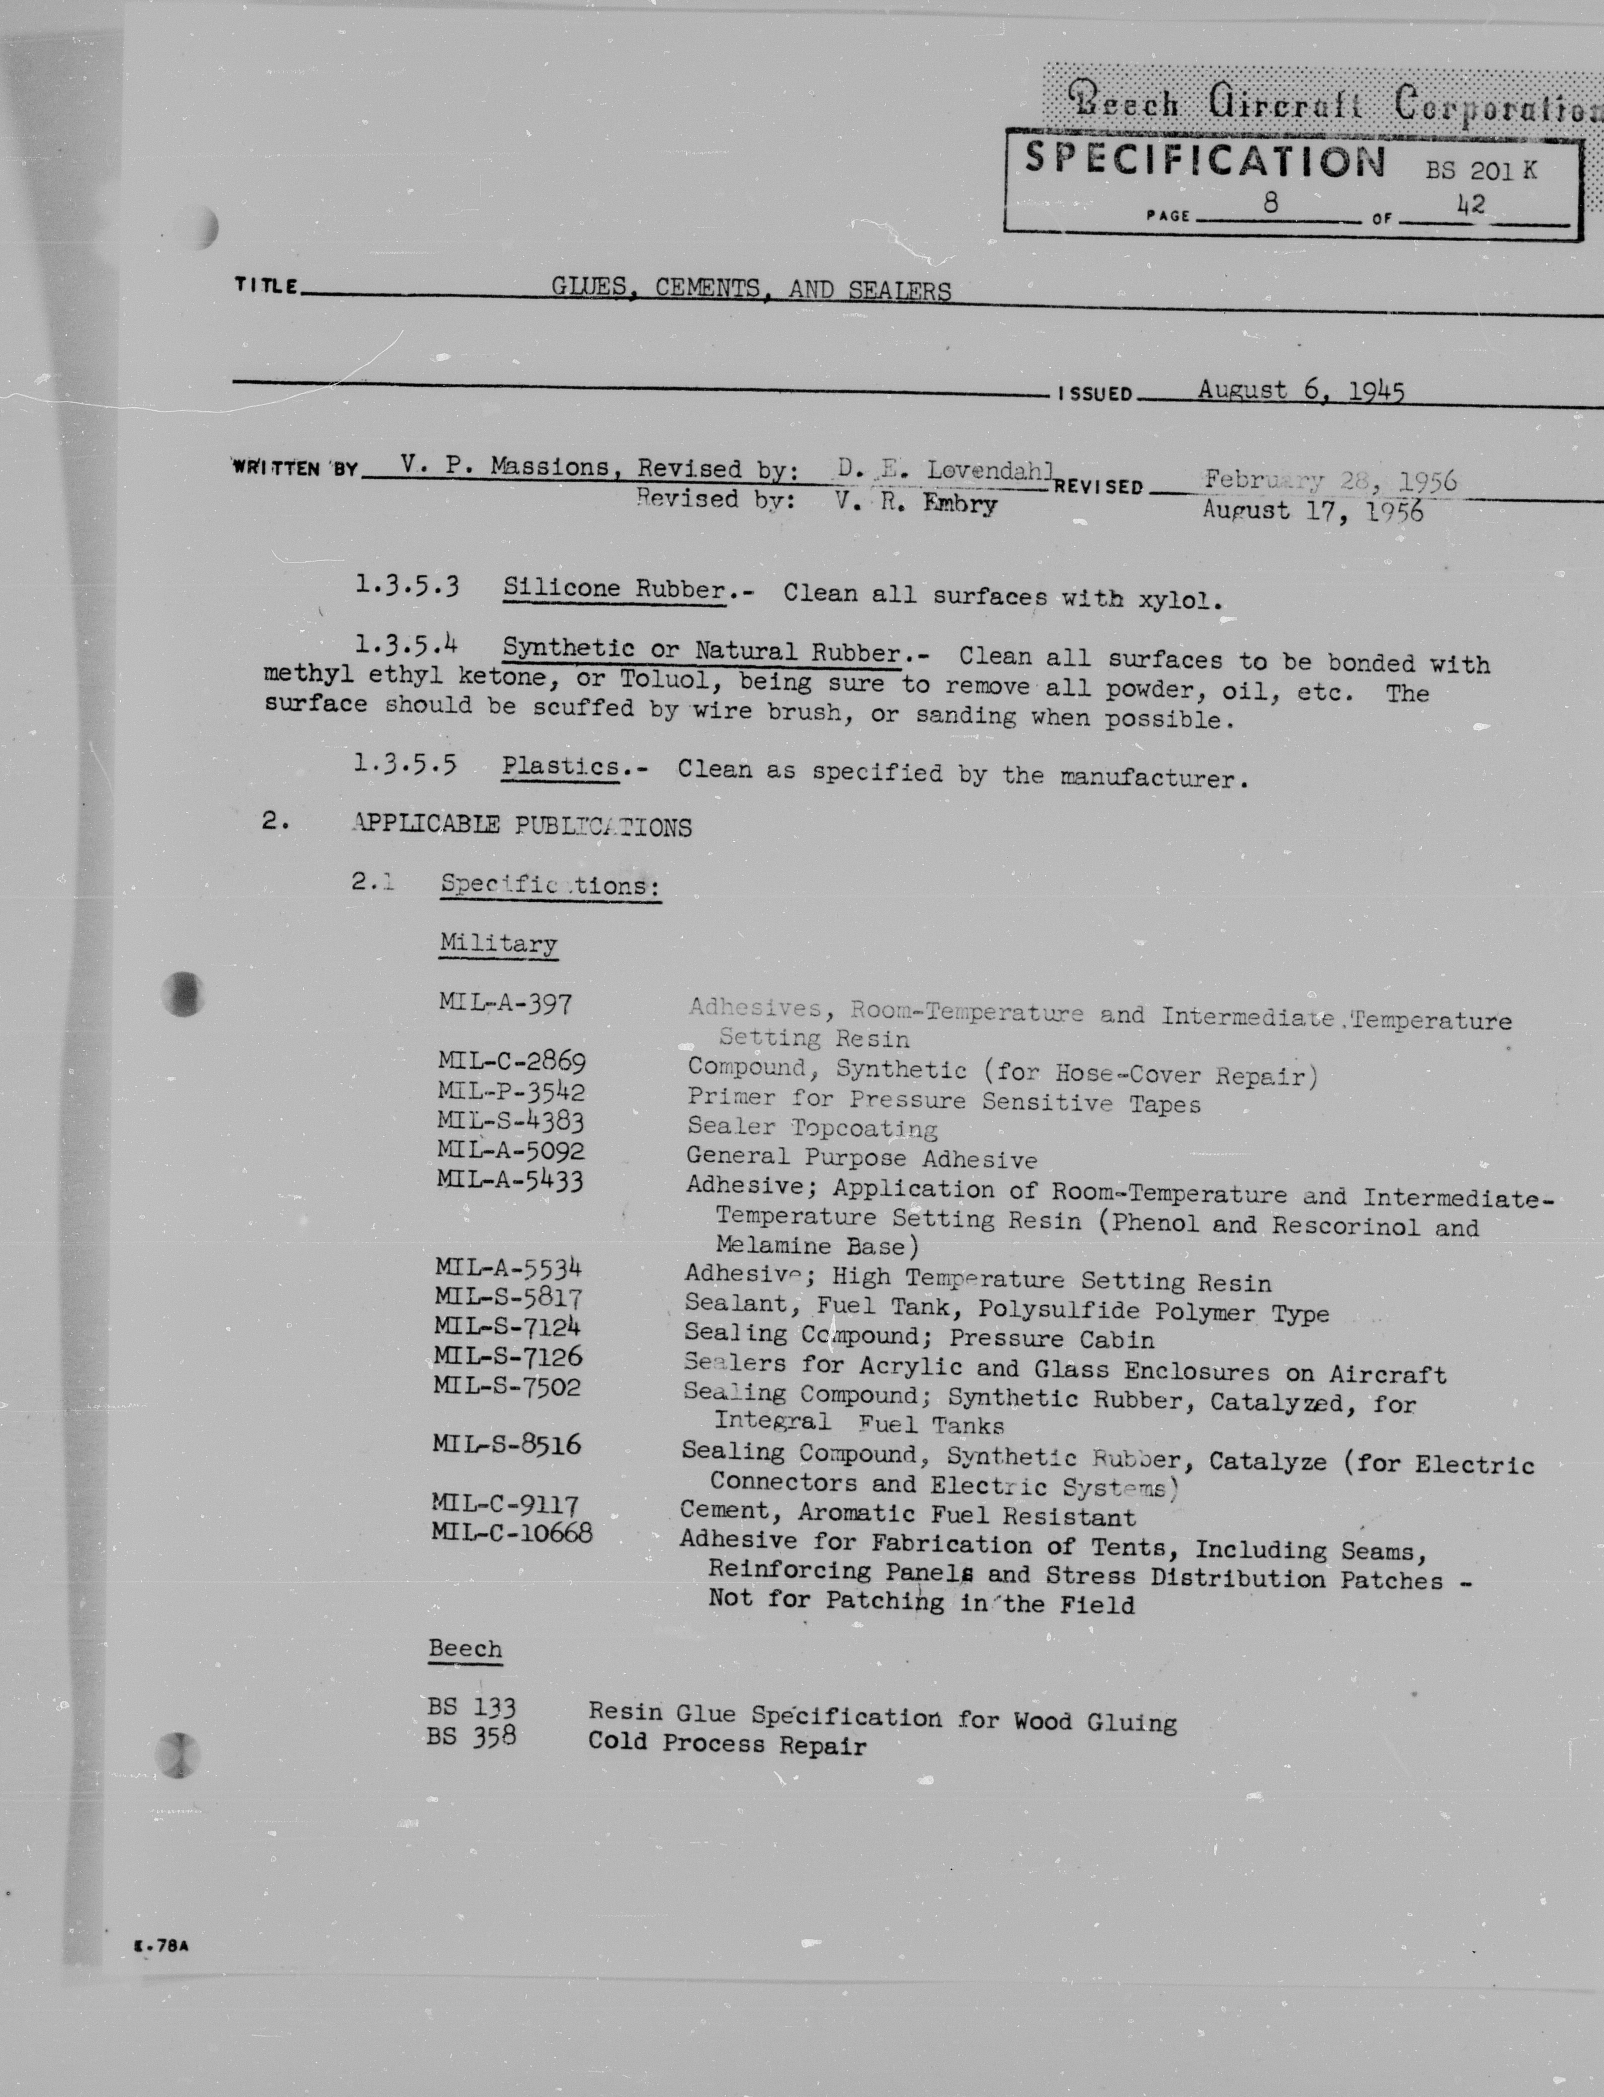 Sample page 10 from AirCorps Library document: Glues, Cements, and Sealants